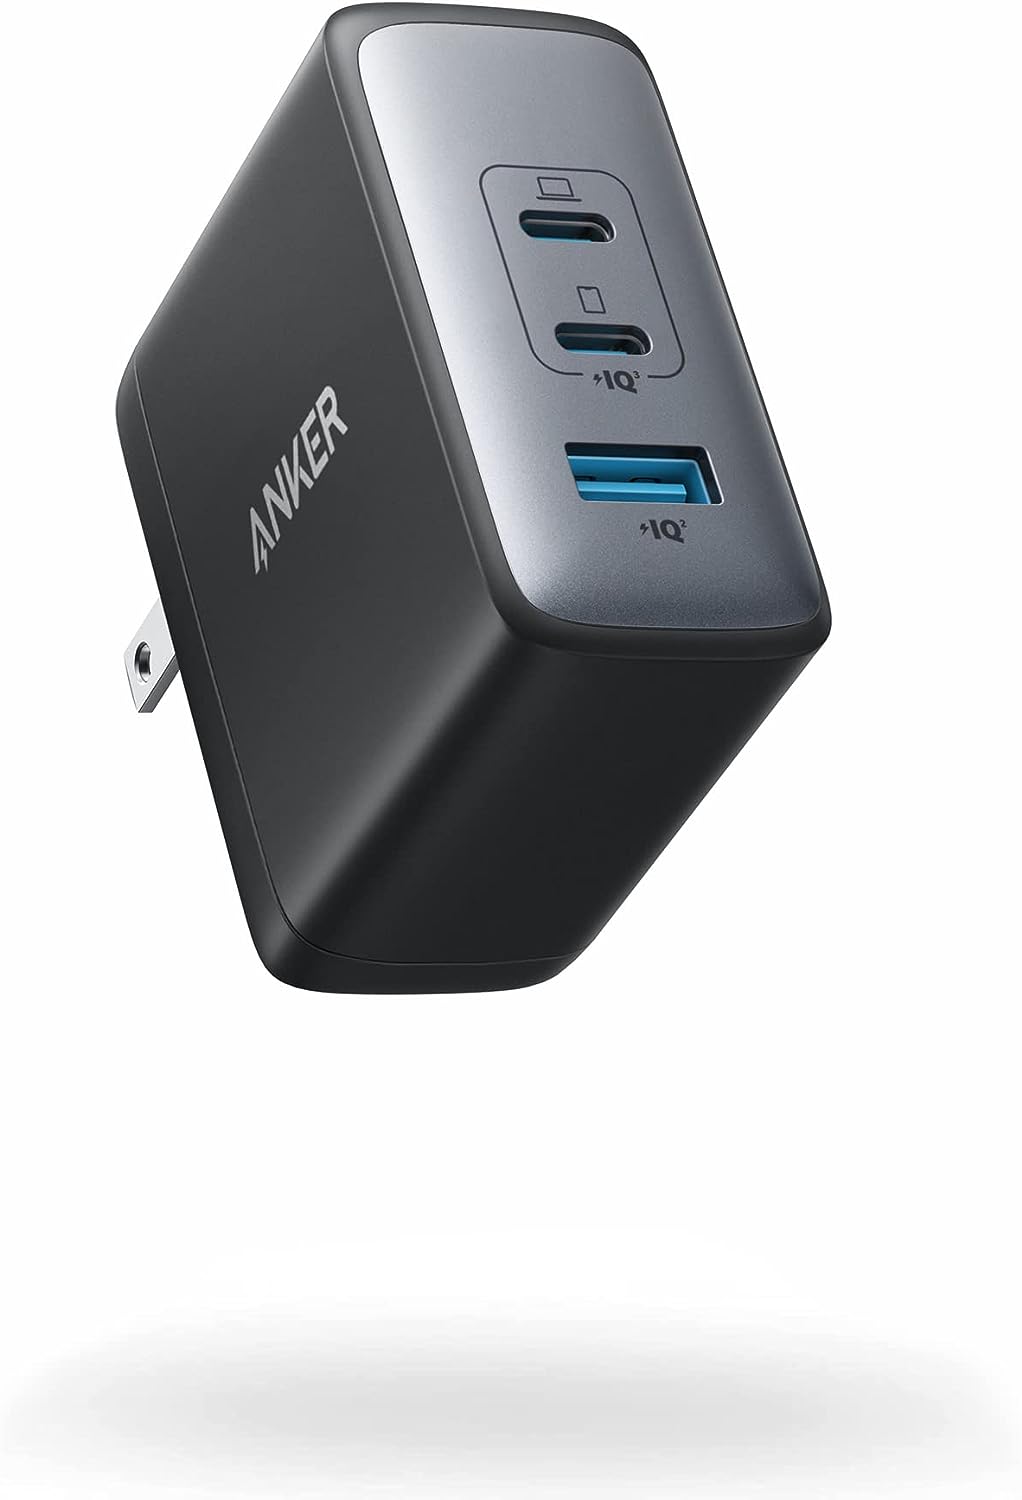 Prime Big Deal: Anker 736 100W GaN II 3-Port USB-C Charger $43 & More + Free Shipping